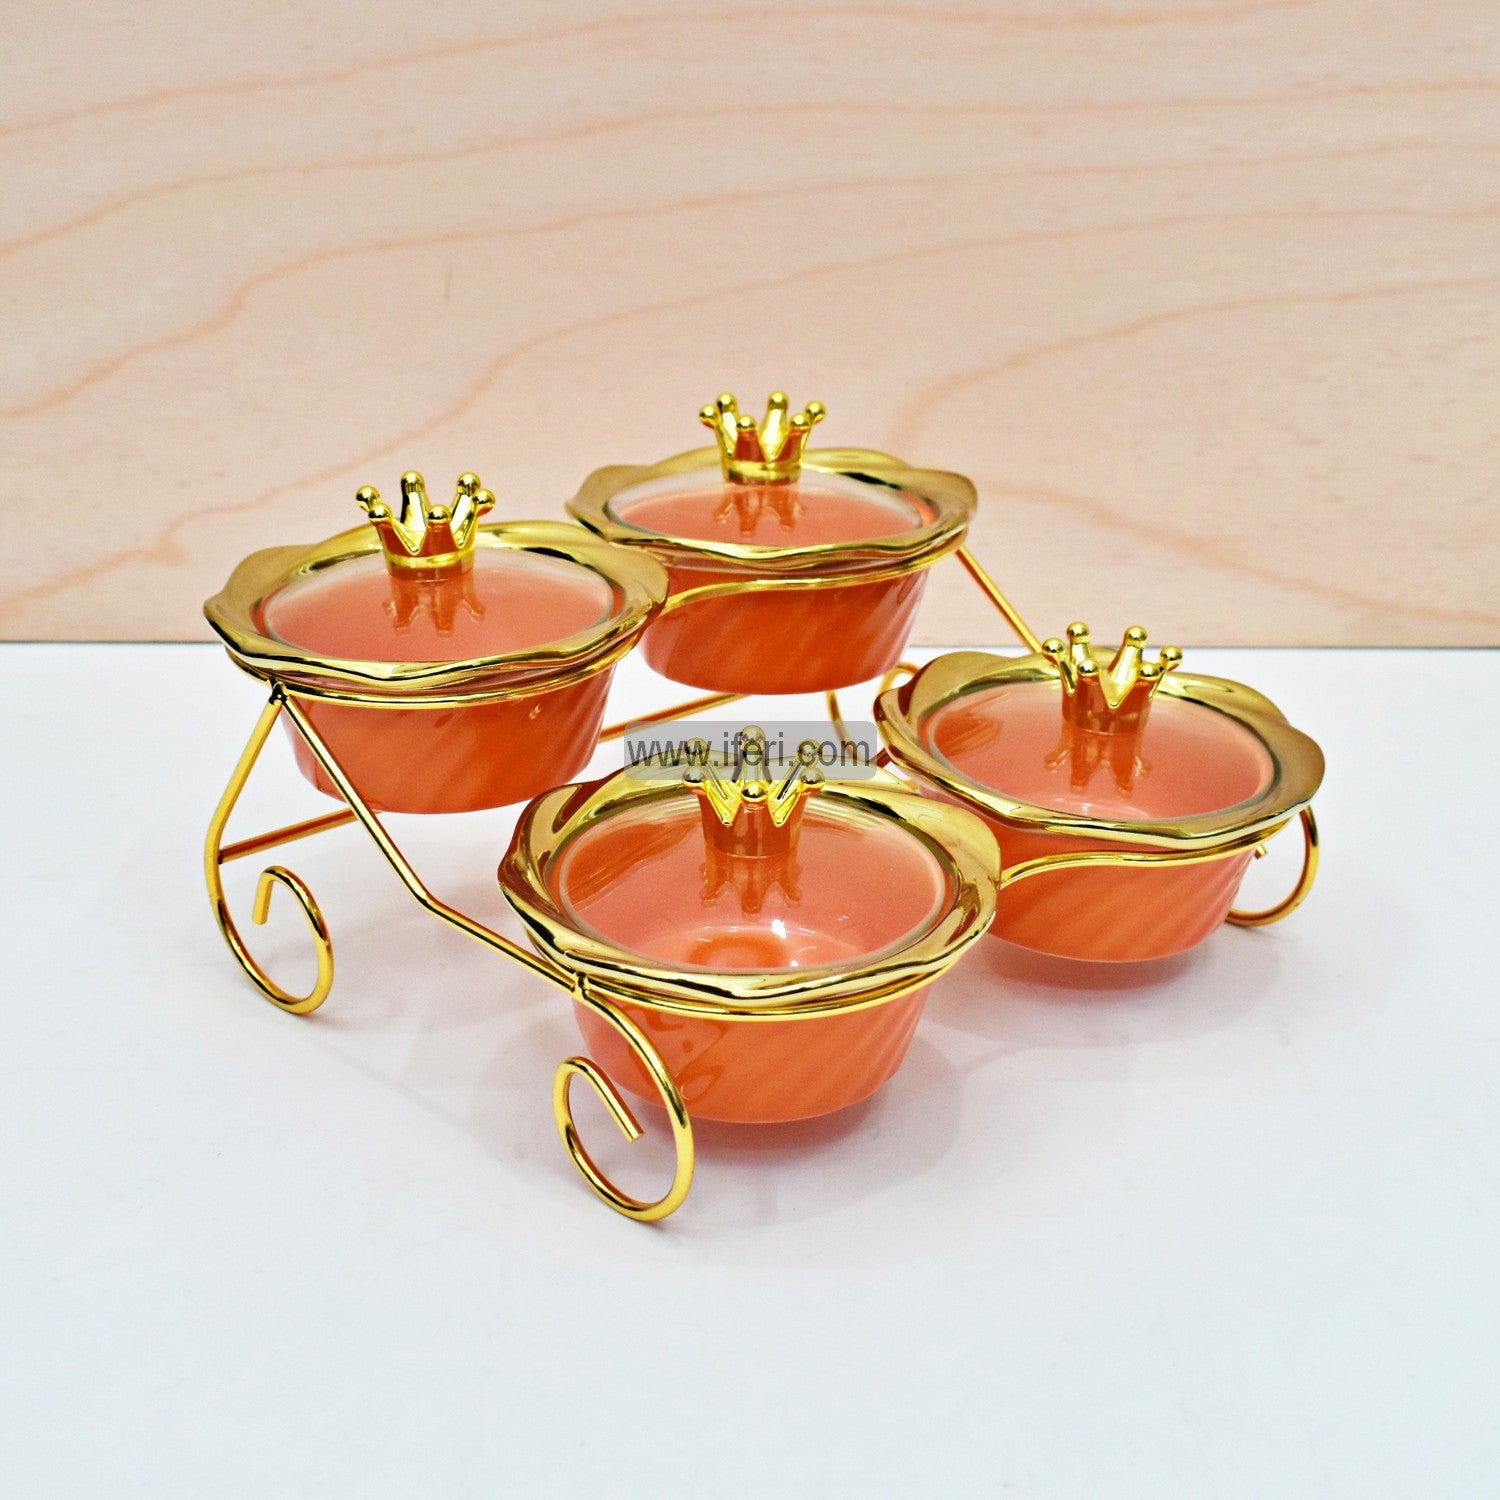 Buy Ceramic Dried Fruit, Candy, Dessert Serving Bowl with Stand Online from iferi.com in Bangladesh